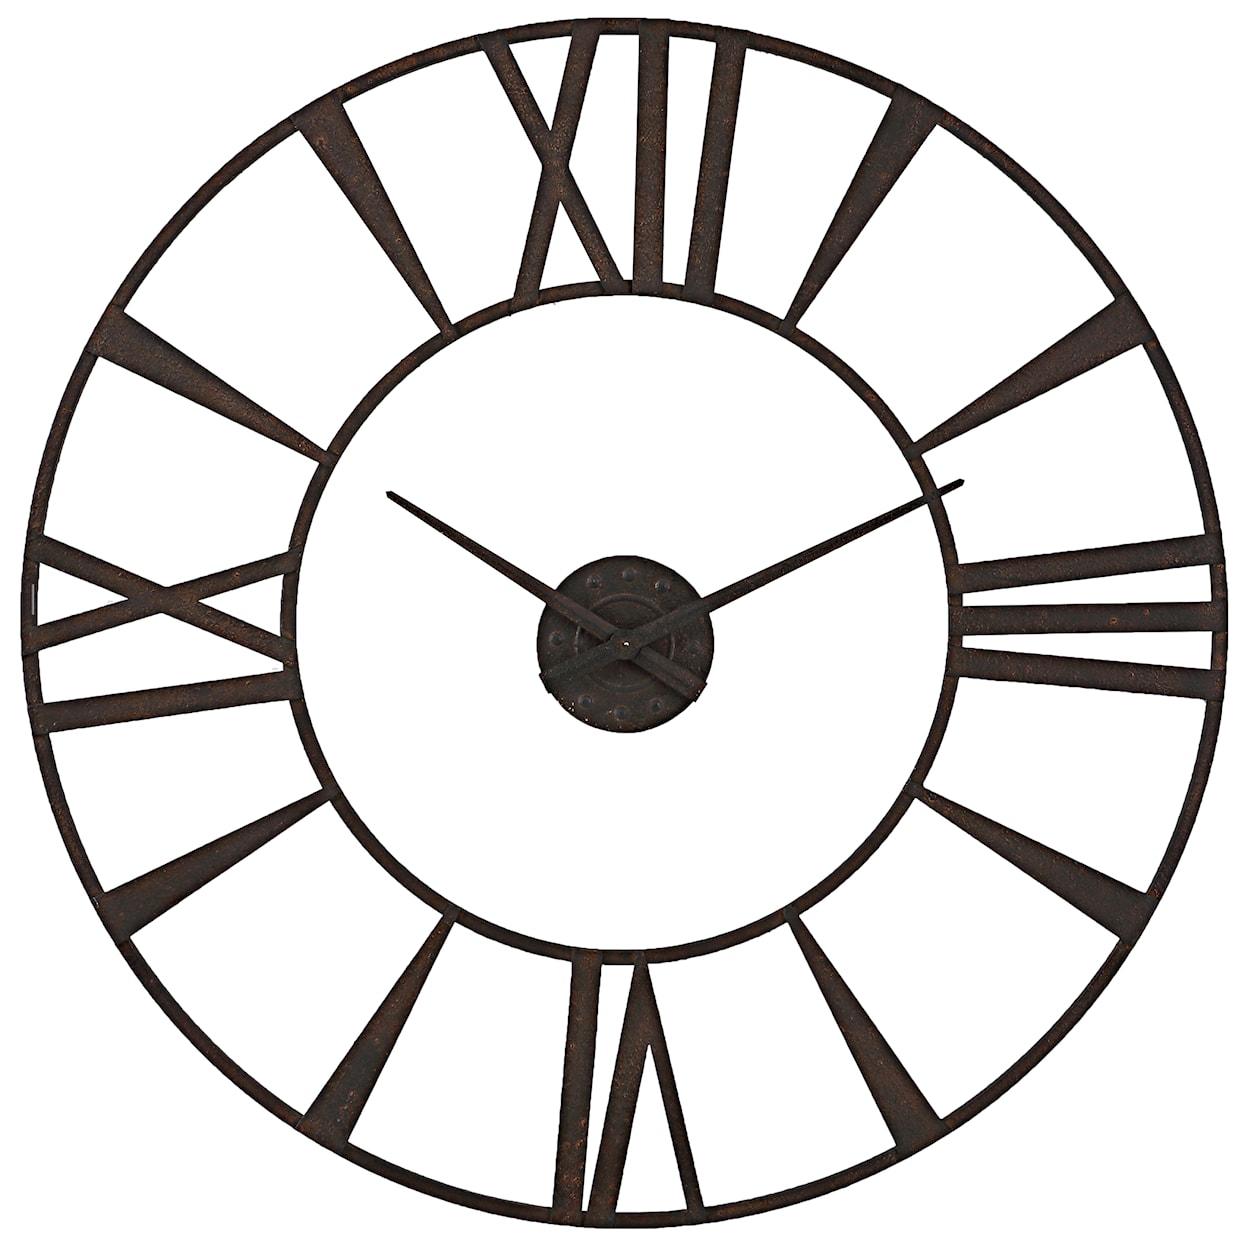 Uttermost Storehouse Storehouse Rustic Wall Clock